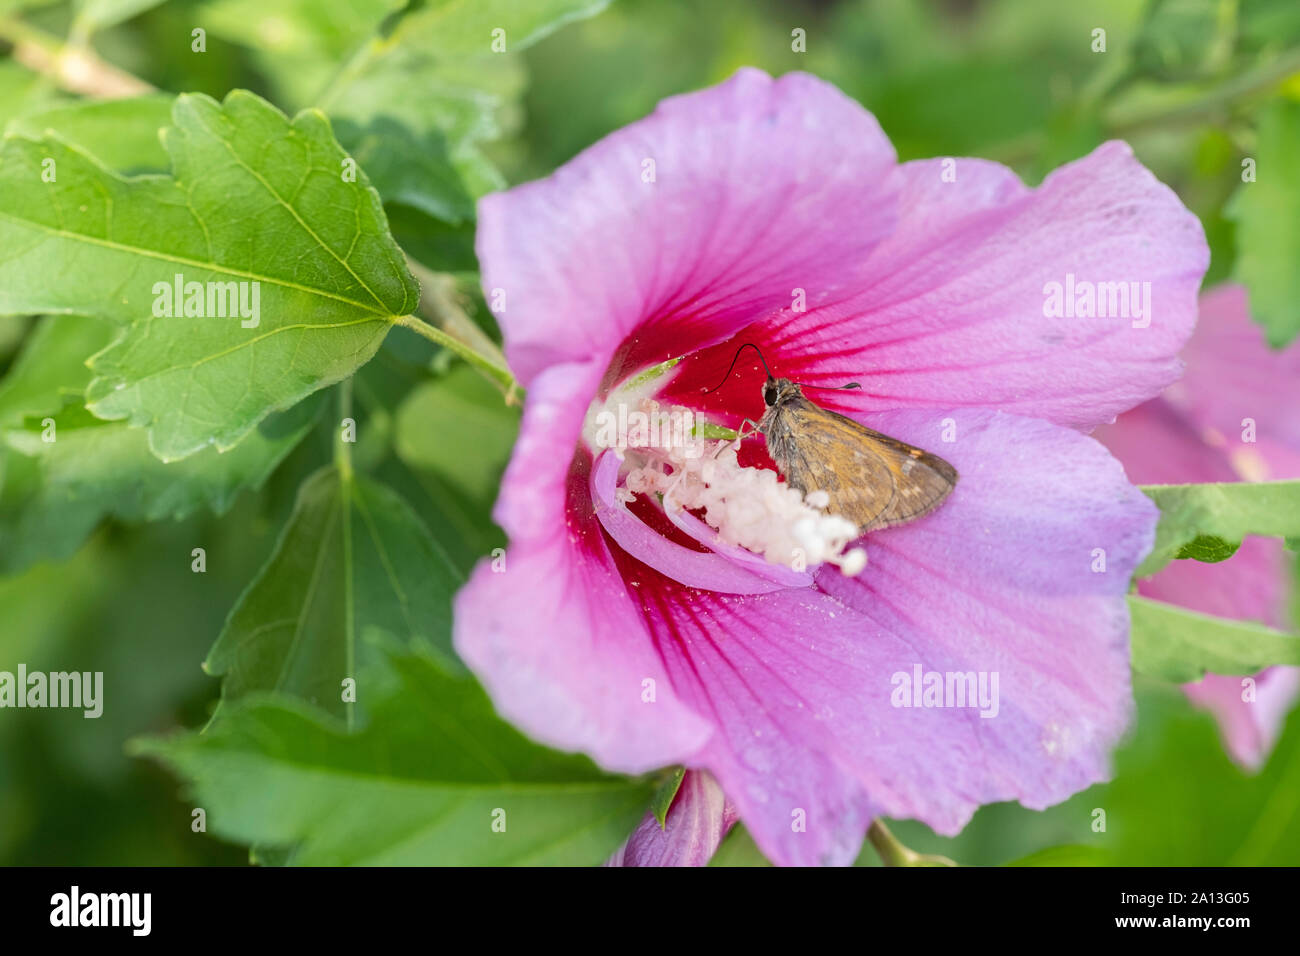 Skipper butterfly, Hesperiidae, nectaring on a pink Rose of Sharon flower, Althea. Kansas, USA. Stock Photo